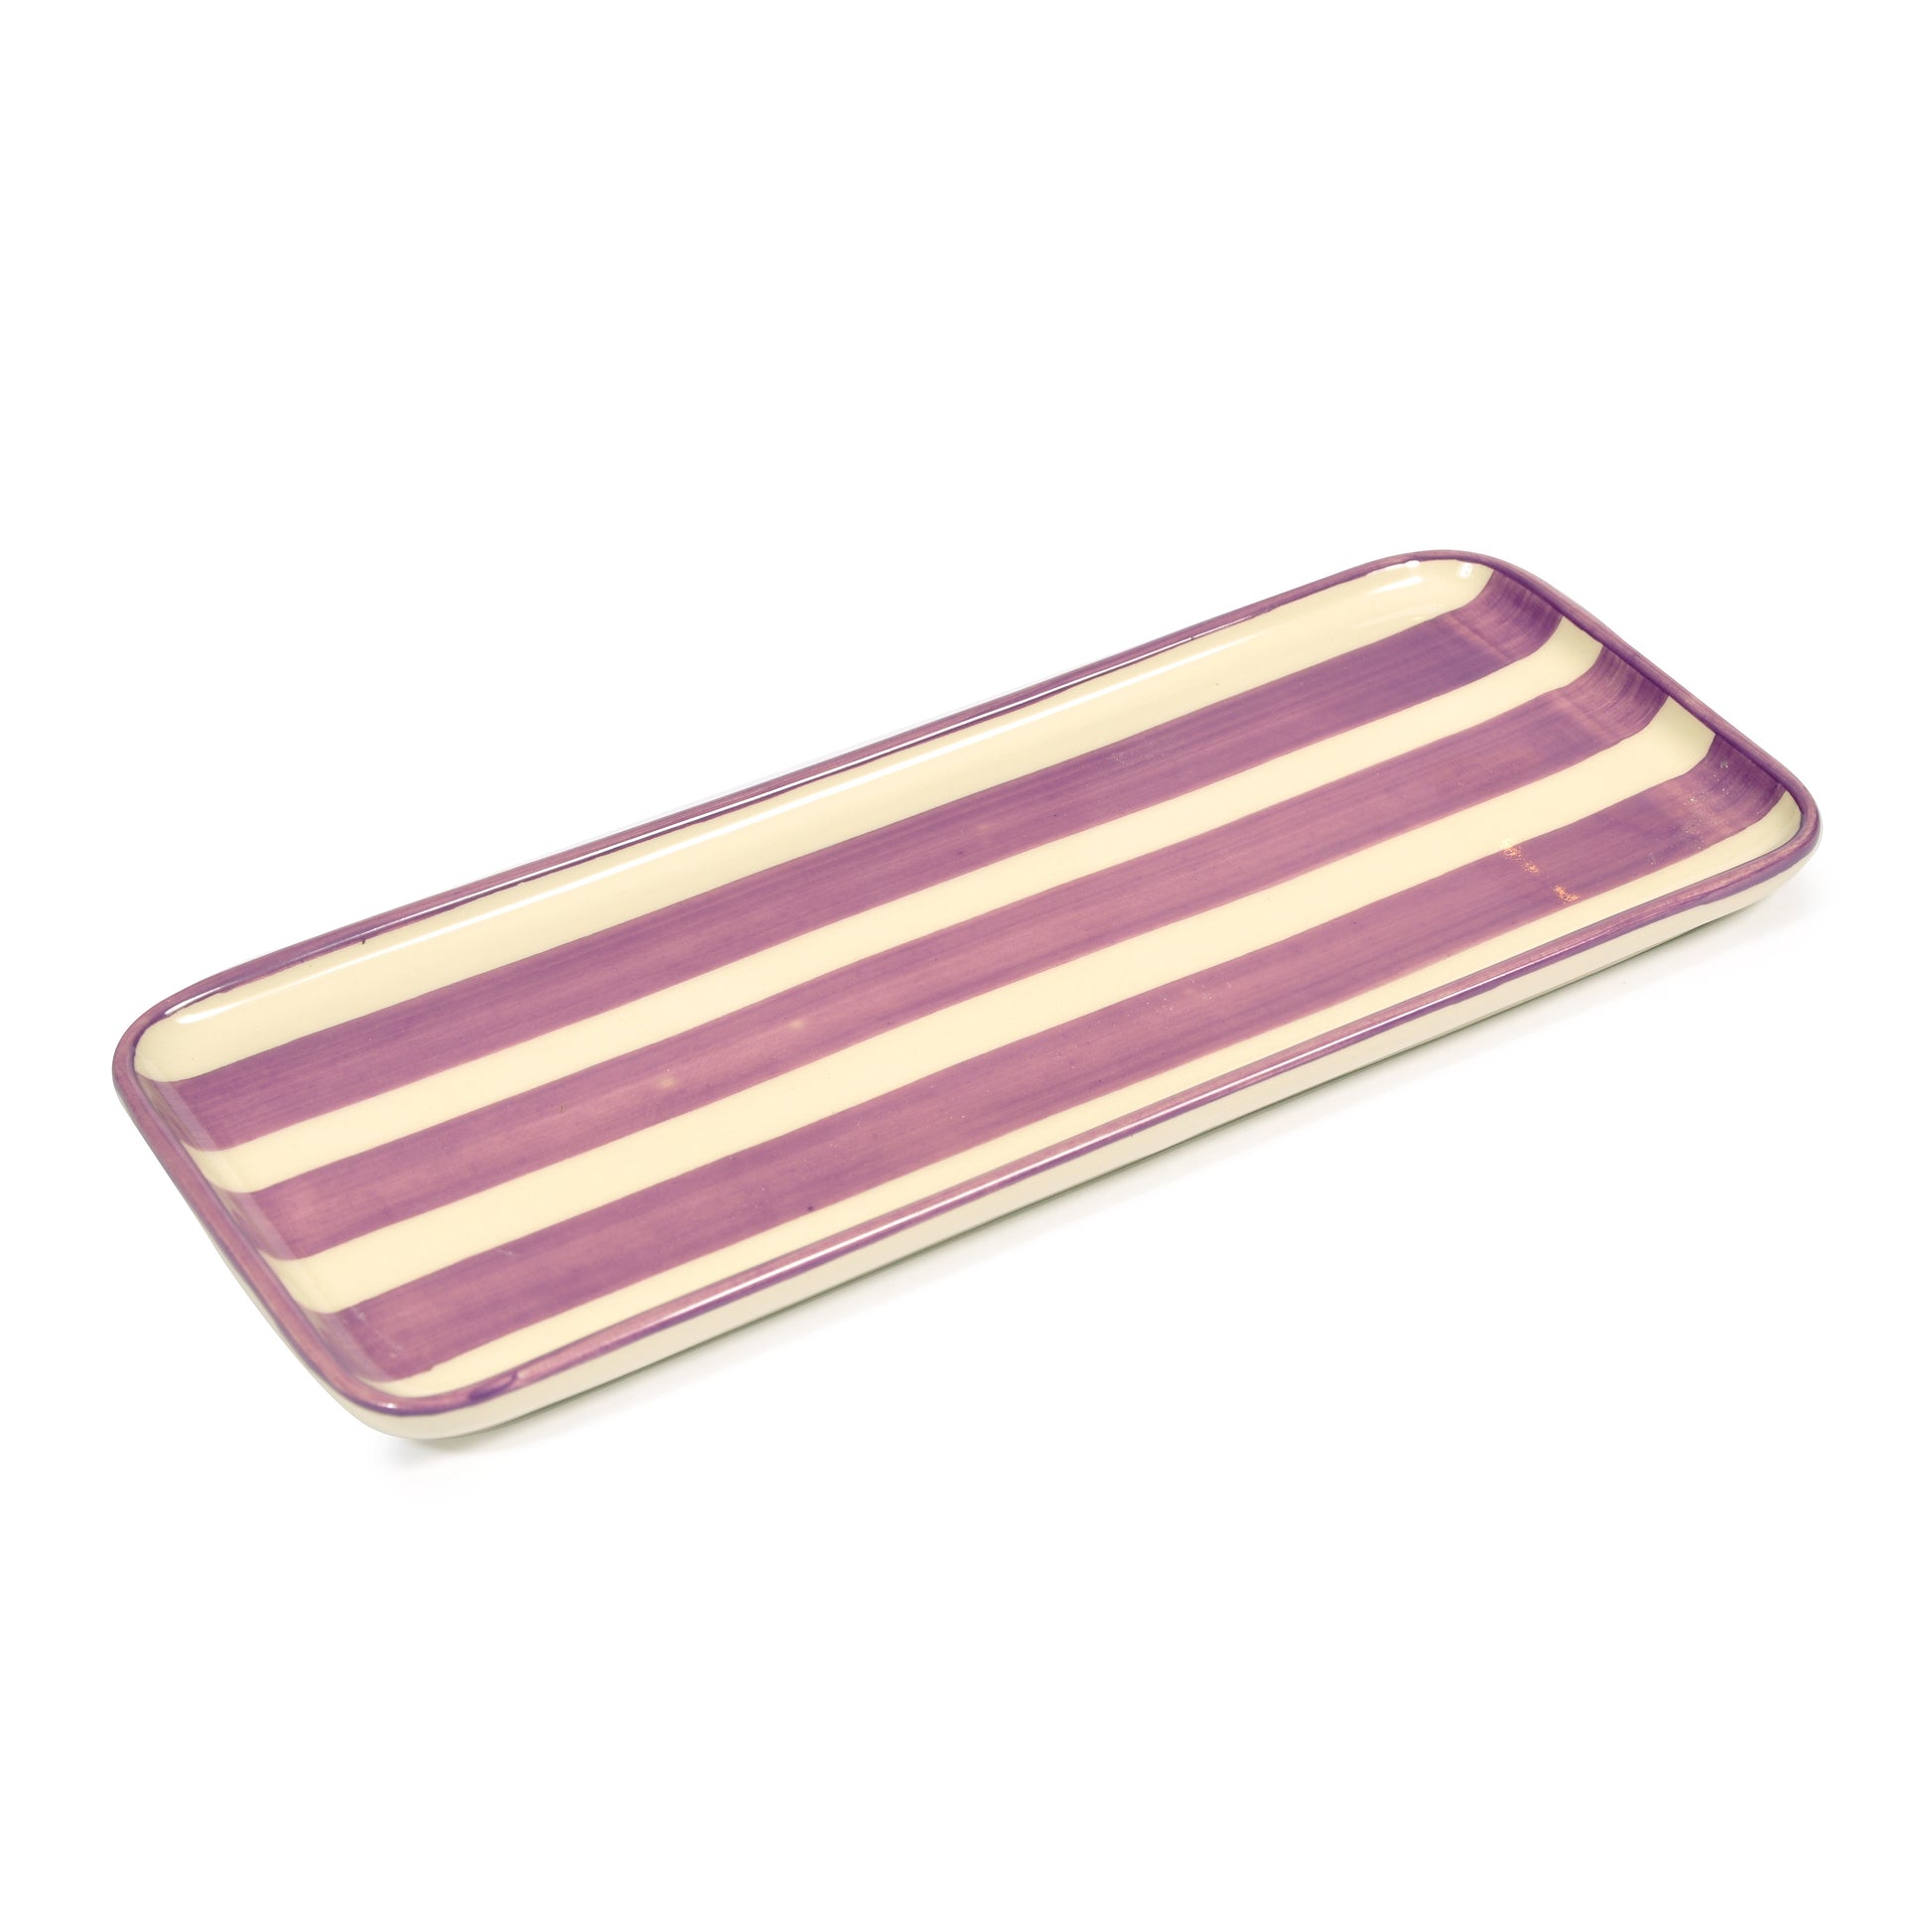 Lavender Striped Porcelain Tray Not specified